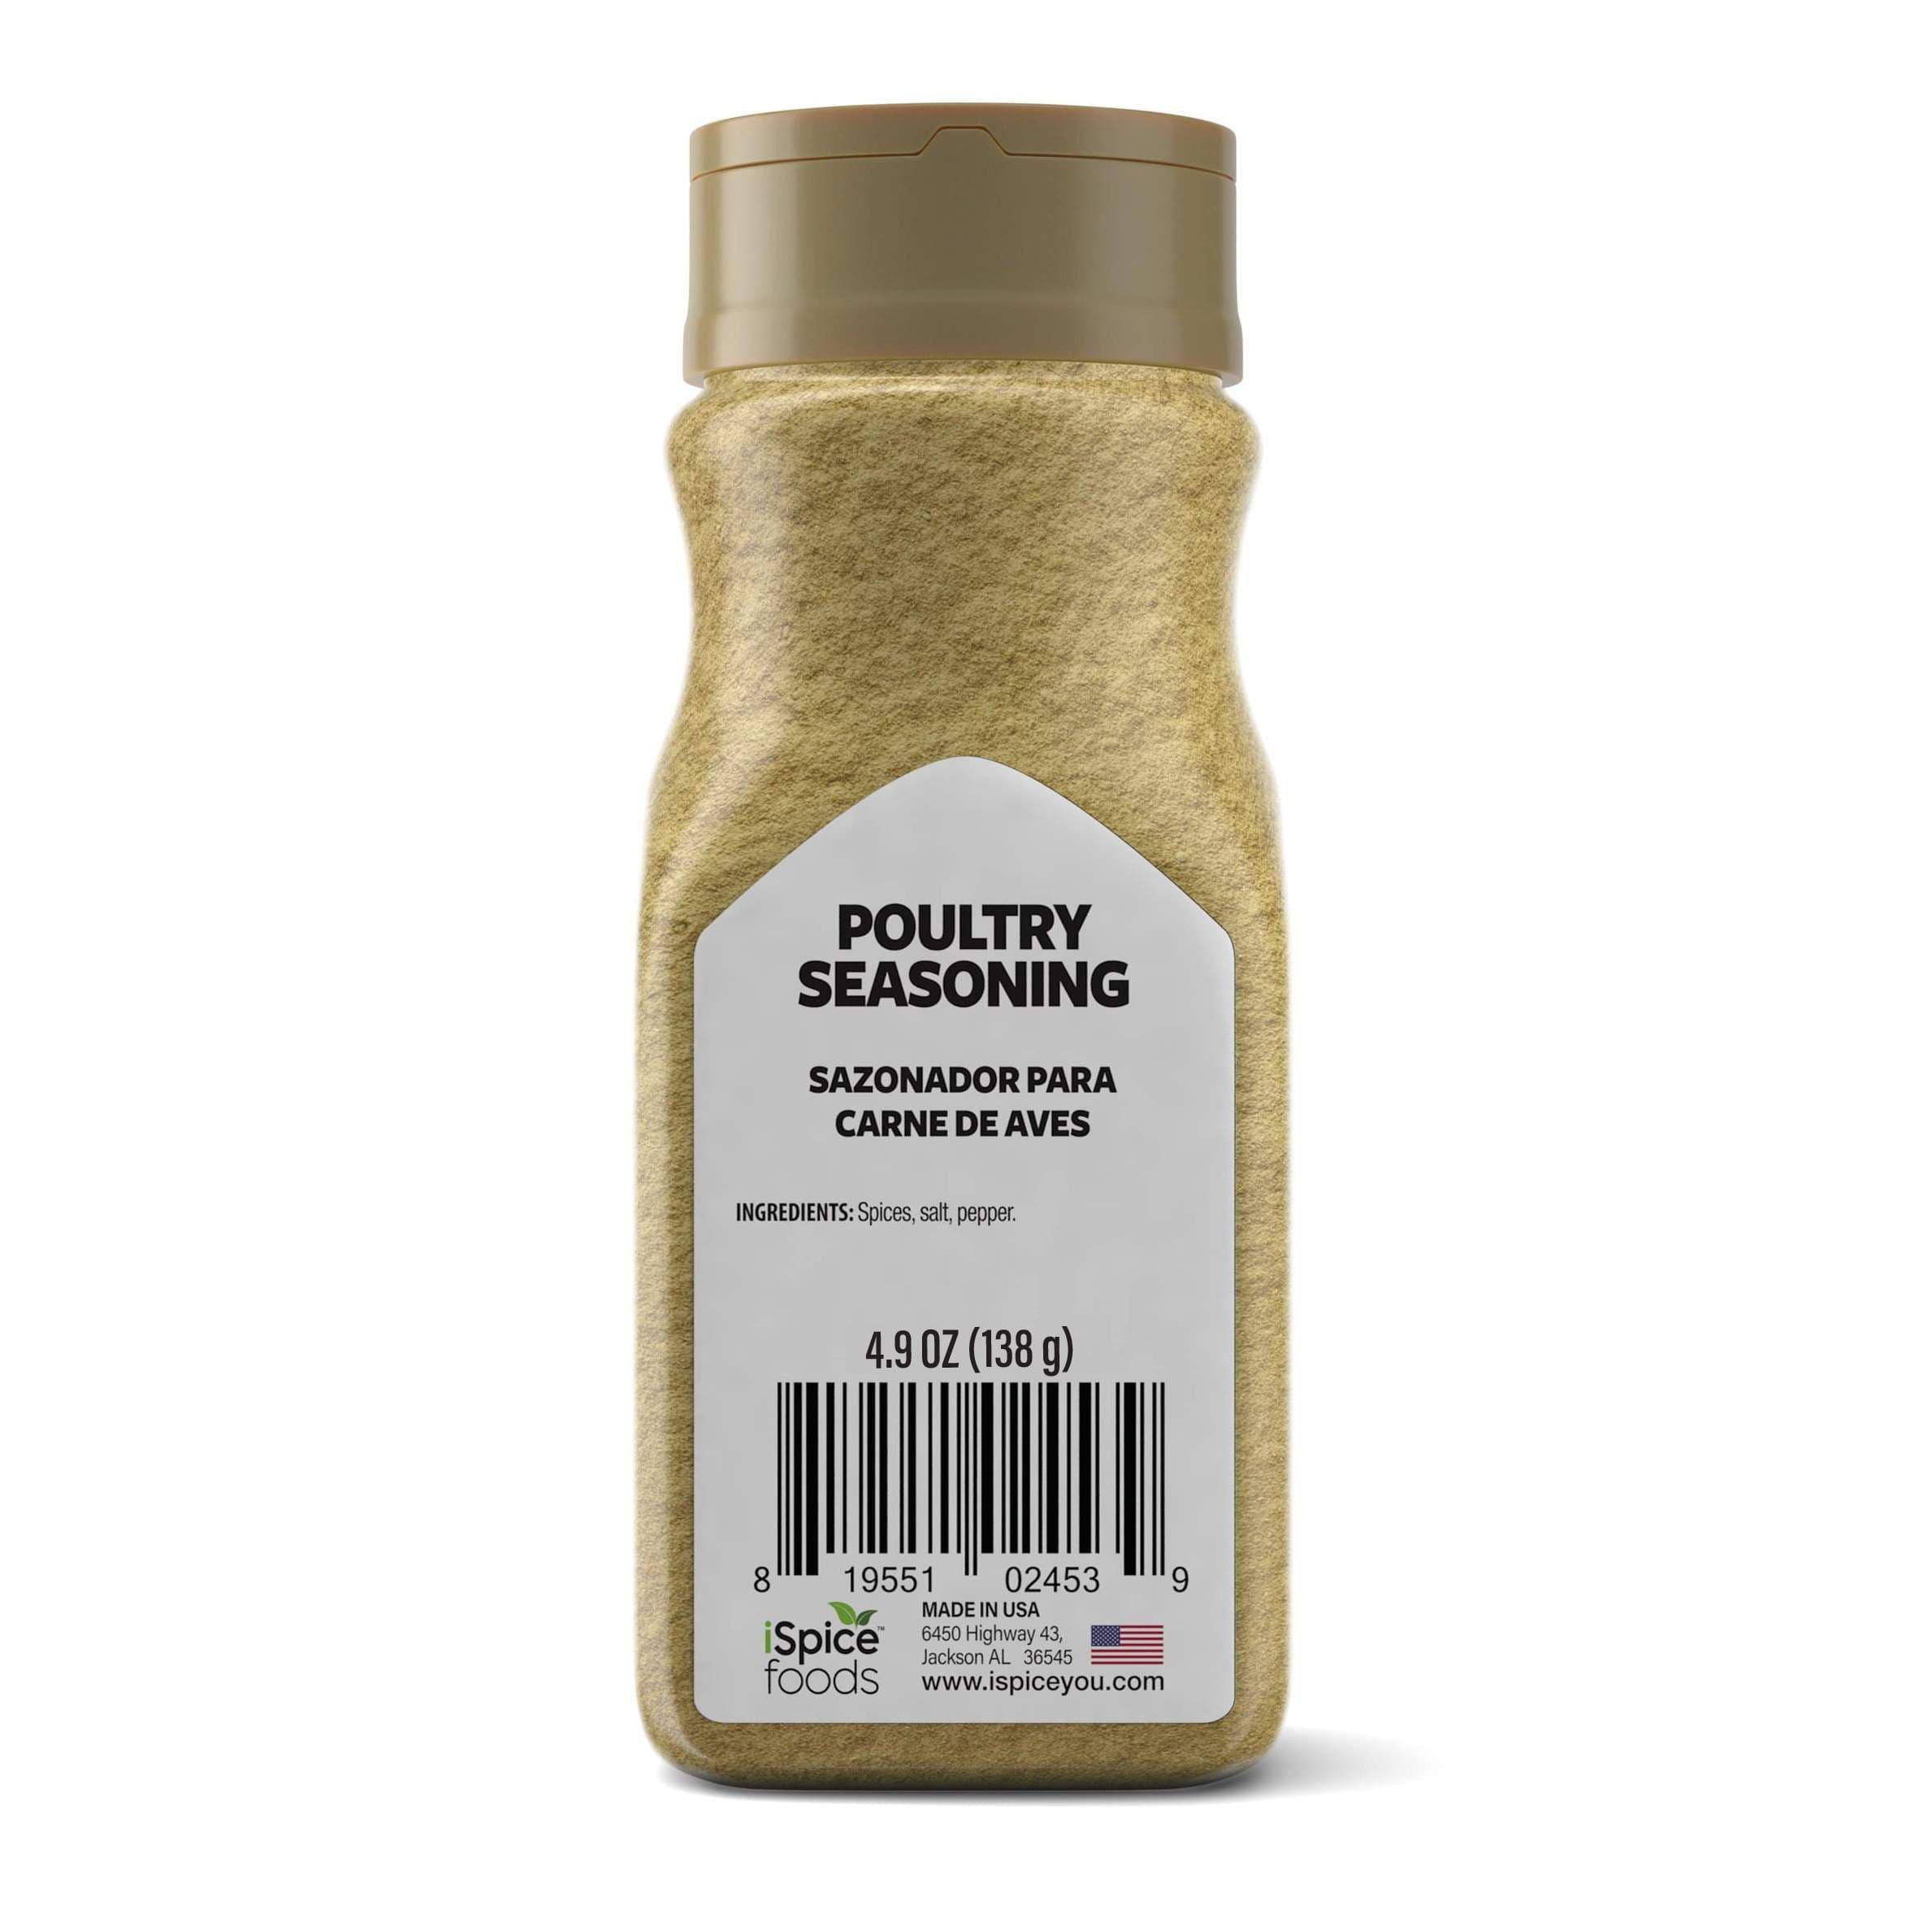 Sage & Spice Poultry Seasoning